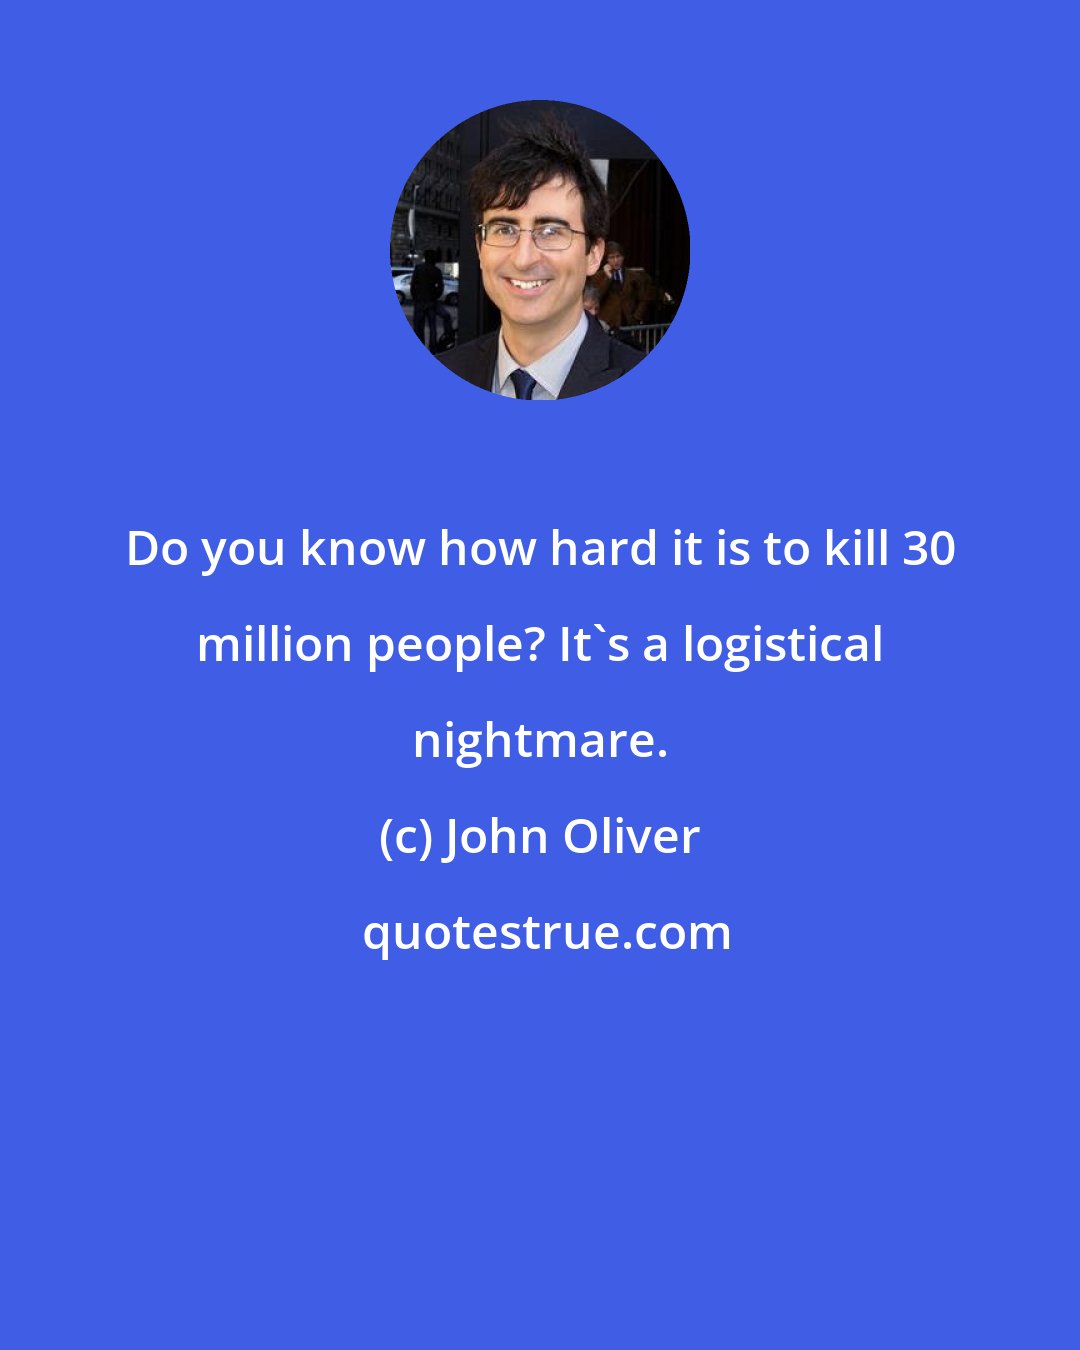 John Oliver: Do you know how hard it is to kill 30 million people? It's a logistical nightmare.